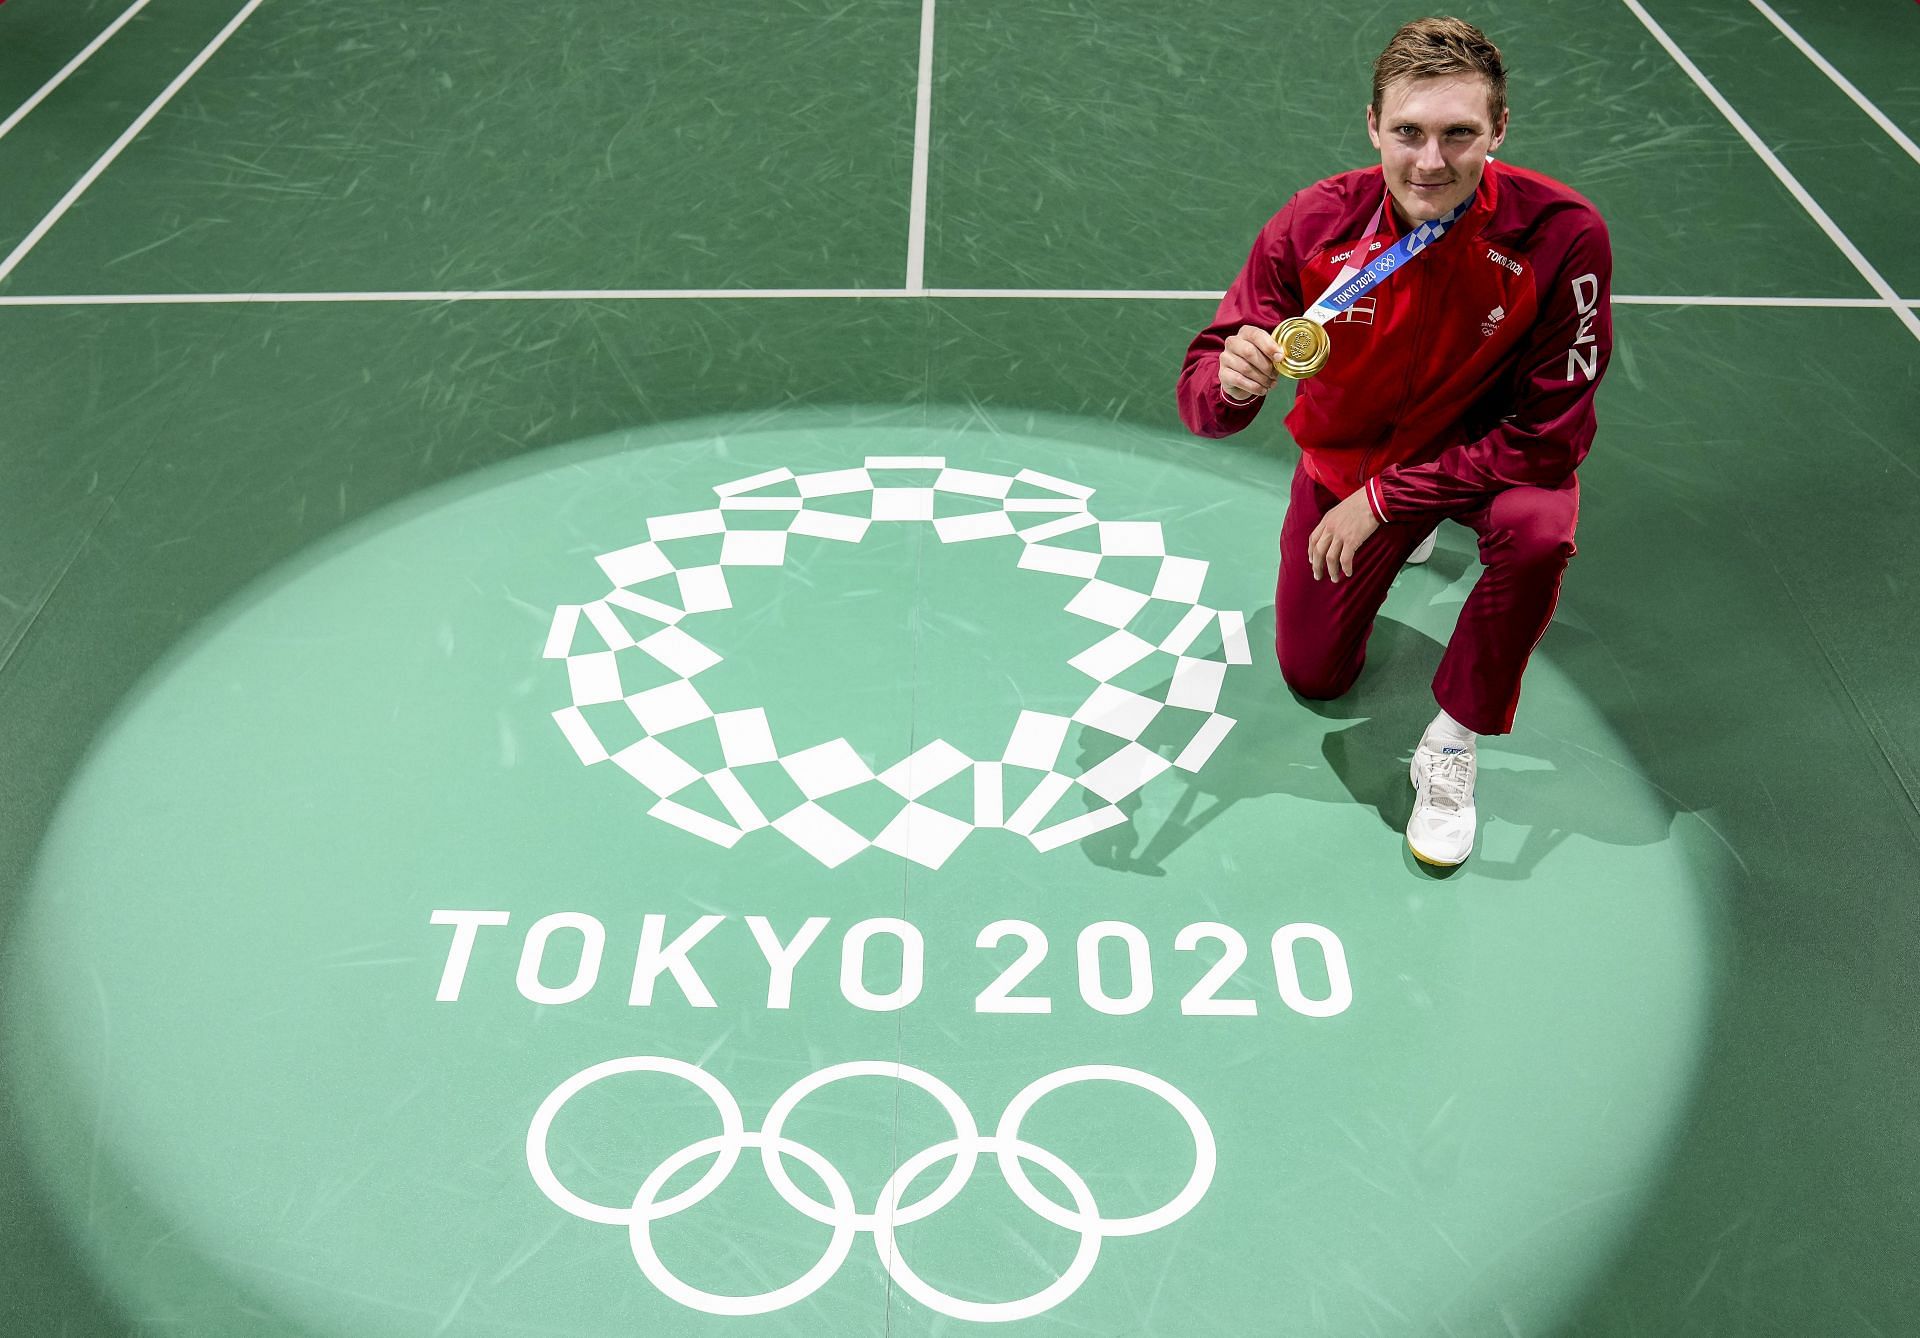 Viktor Axelsen with his Tokyo Olympic gold medal (Image credits: Getty Images)